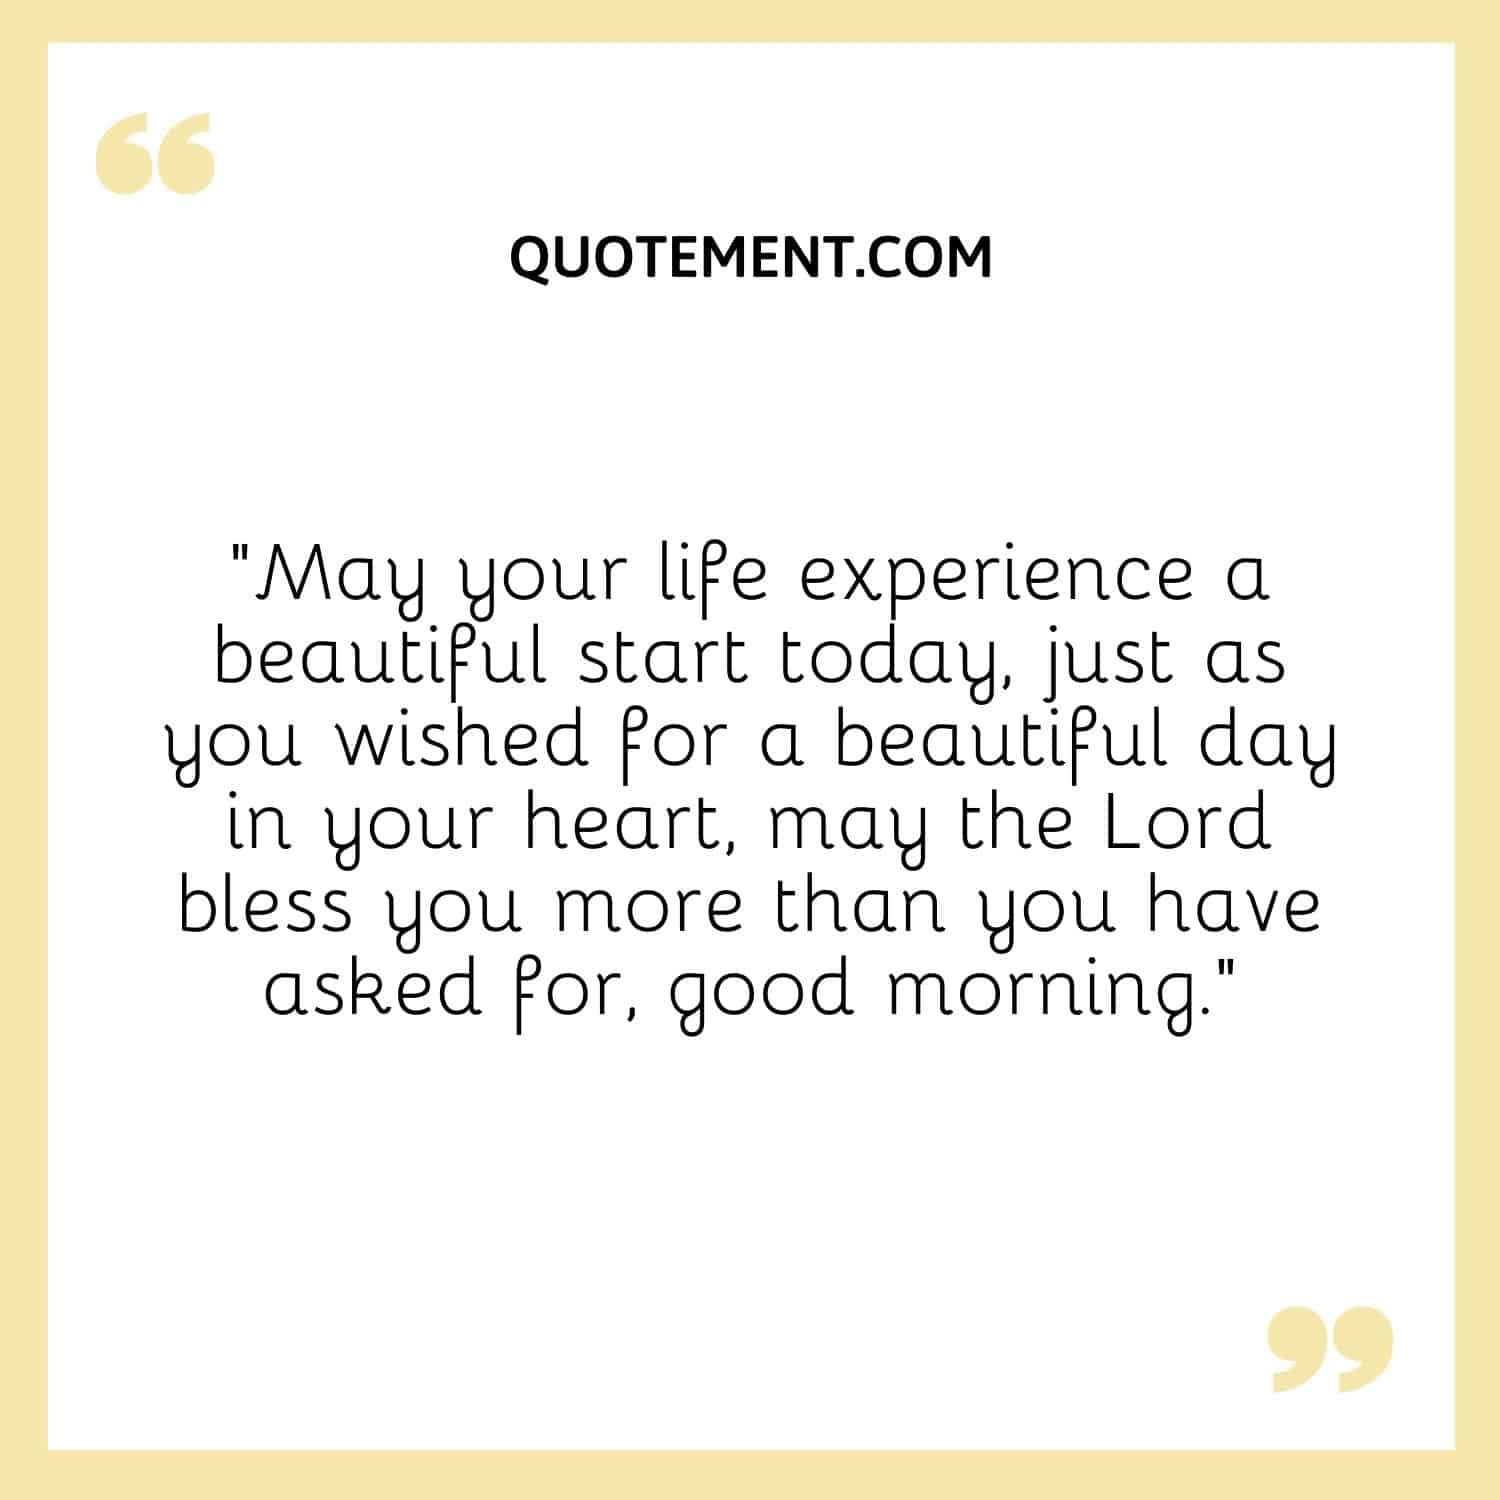 May your life experience a beautiful start today